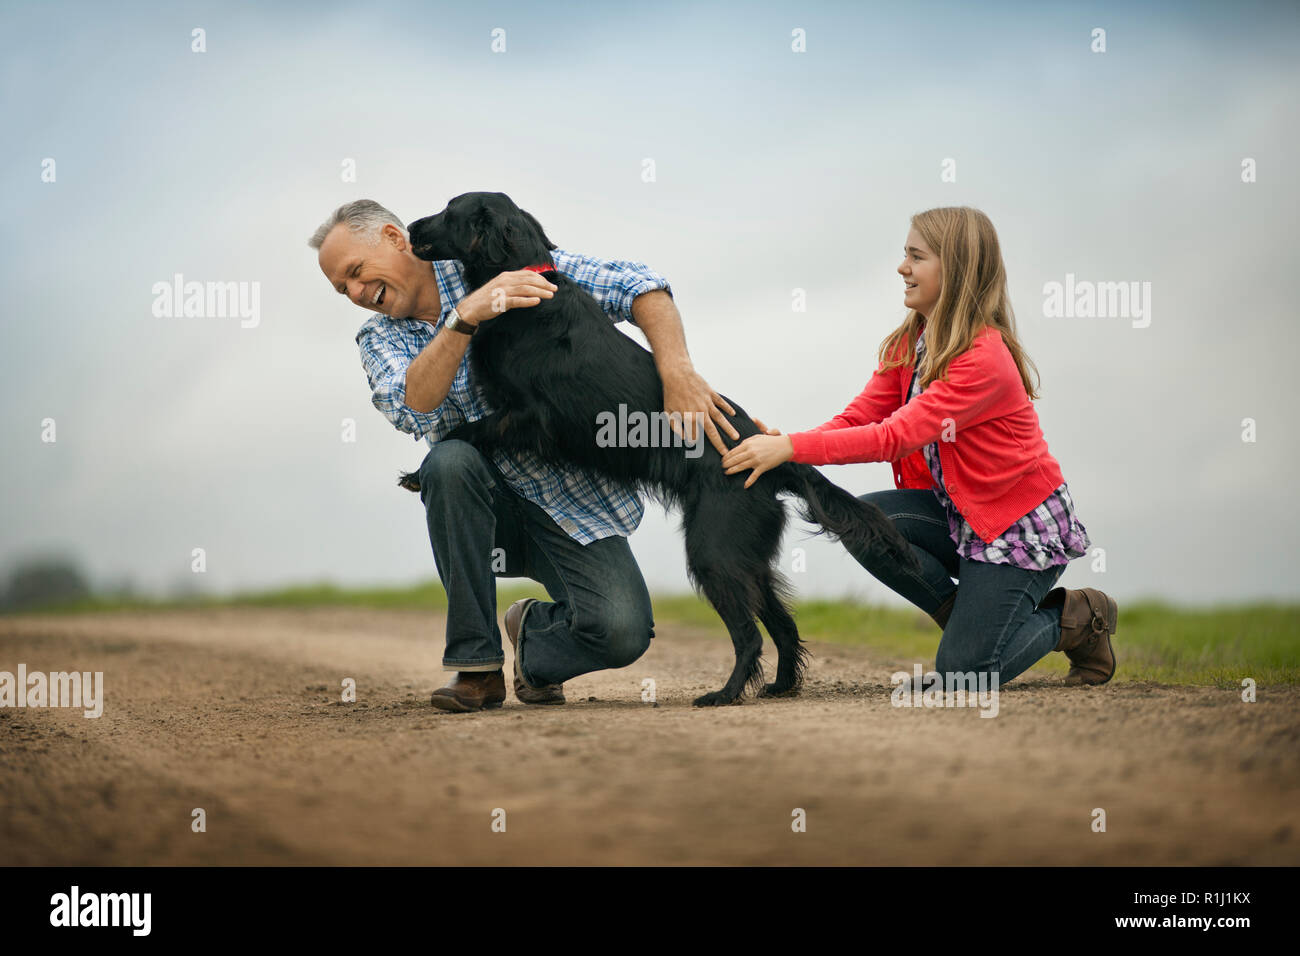 Dog playfully jumping up on its owner. Stock Photo